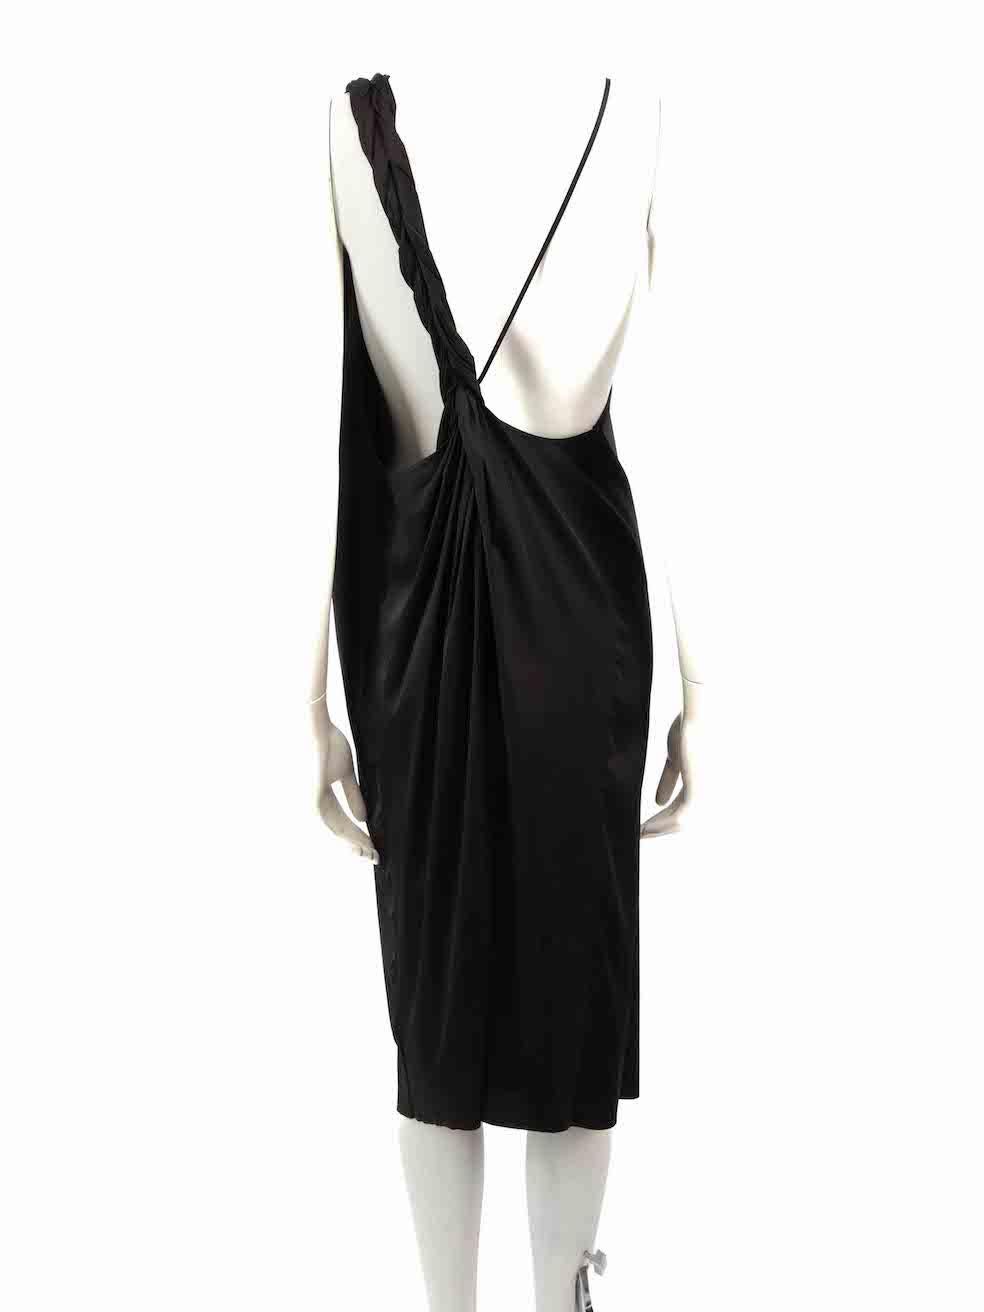 Acne Studios Black Braided Strap Dress Size M In Good Condition For Sale In London, GB